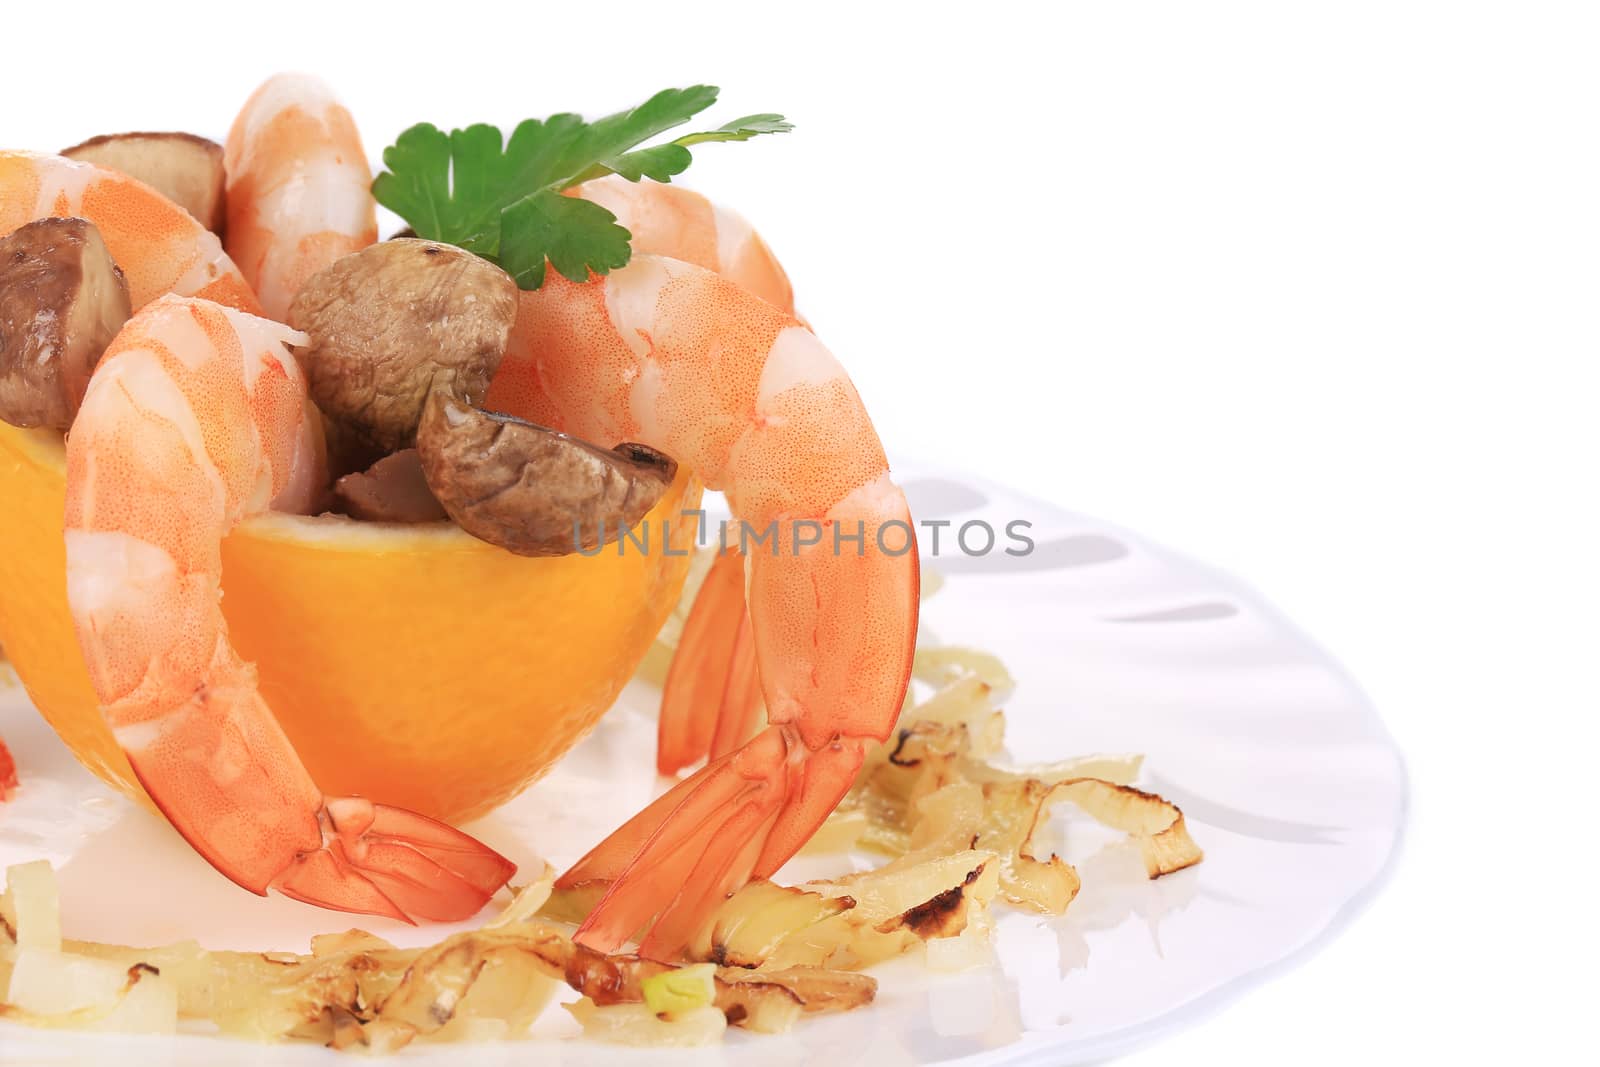 Shrimp salad with mushrooms. Isolated on a white background.